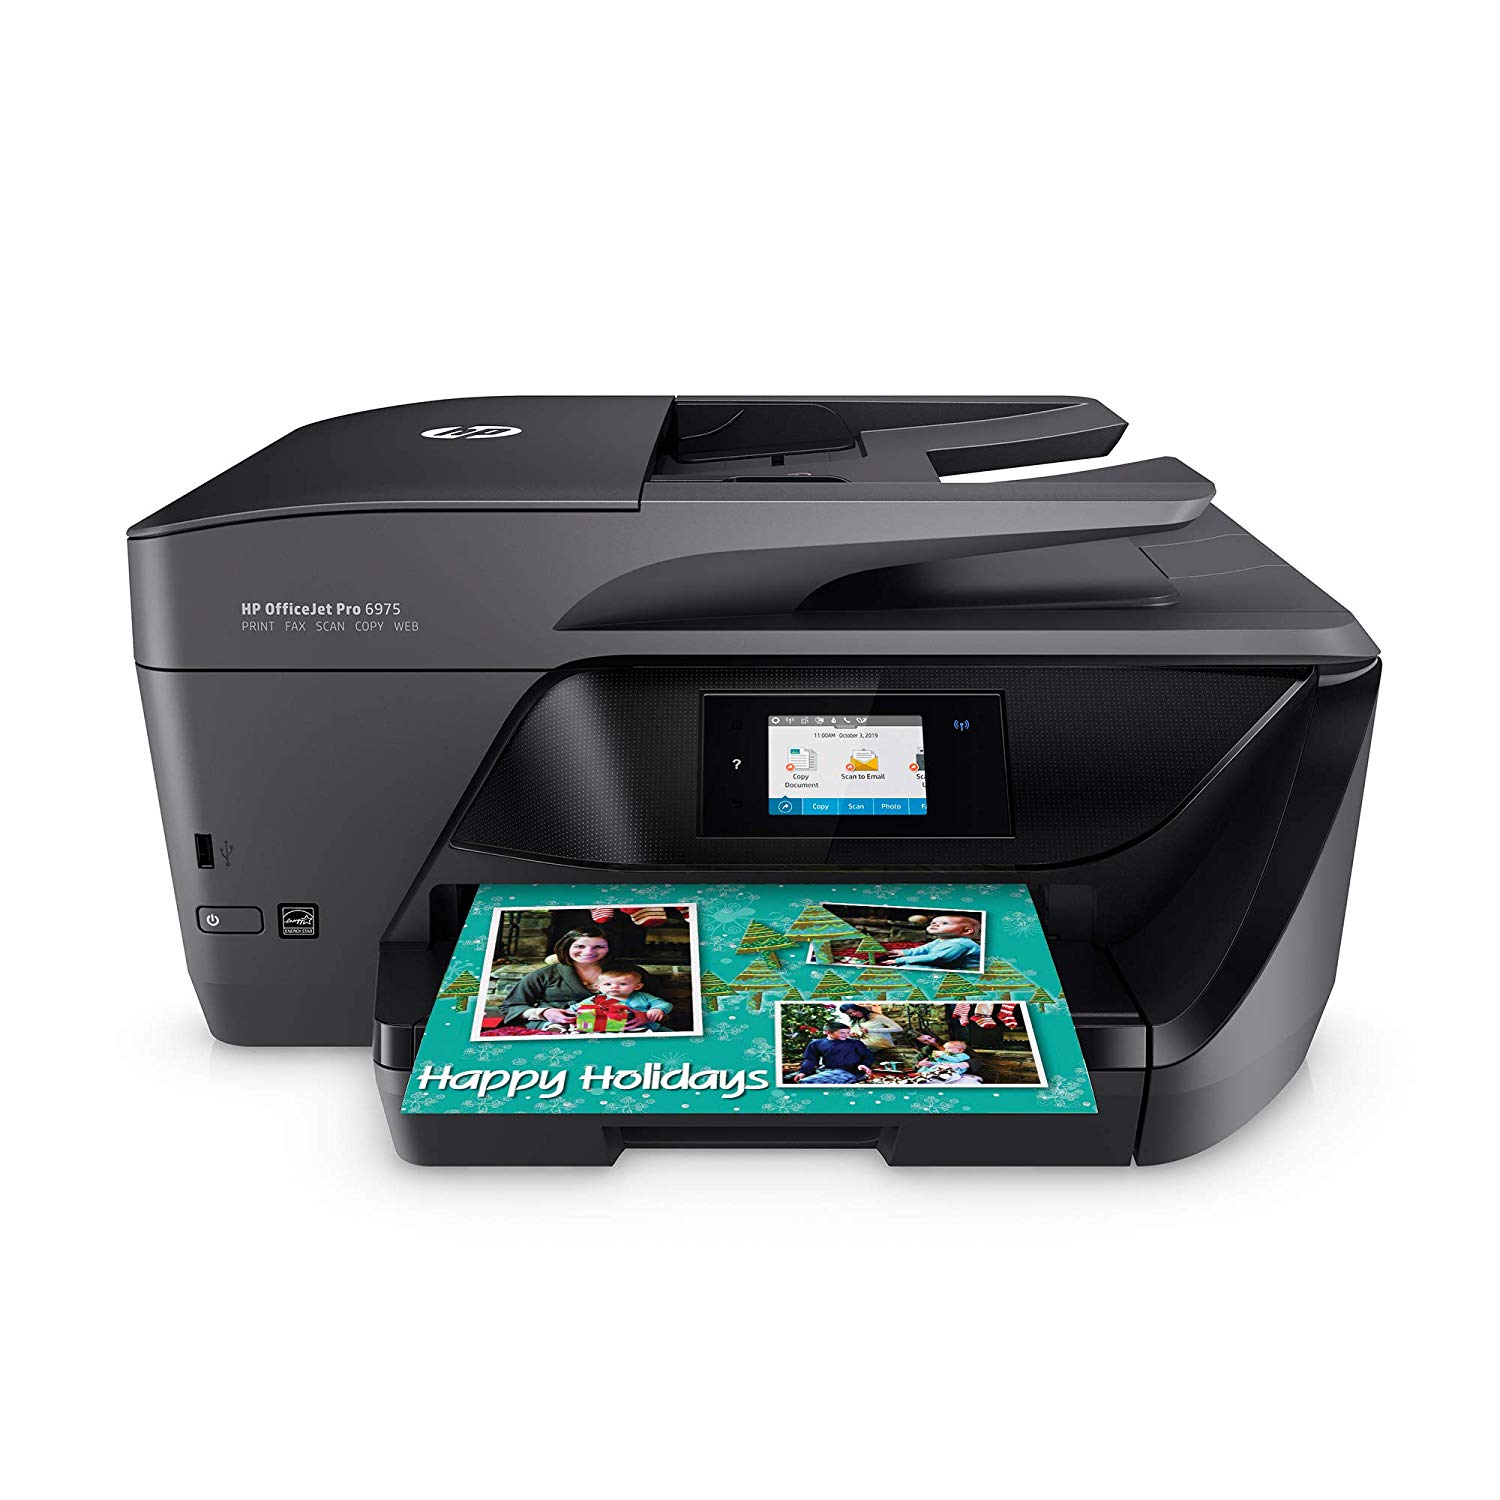 HP OfficeJet Pro 6975 All-in-One Wireless Printer Review